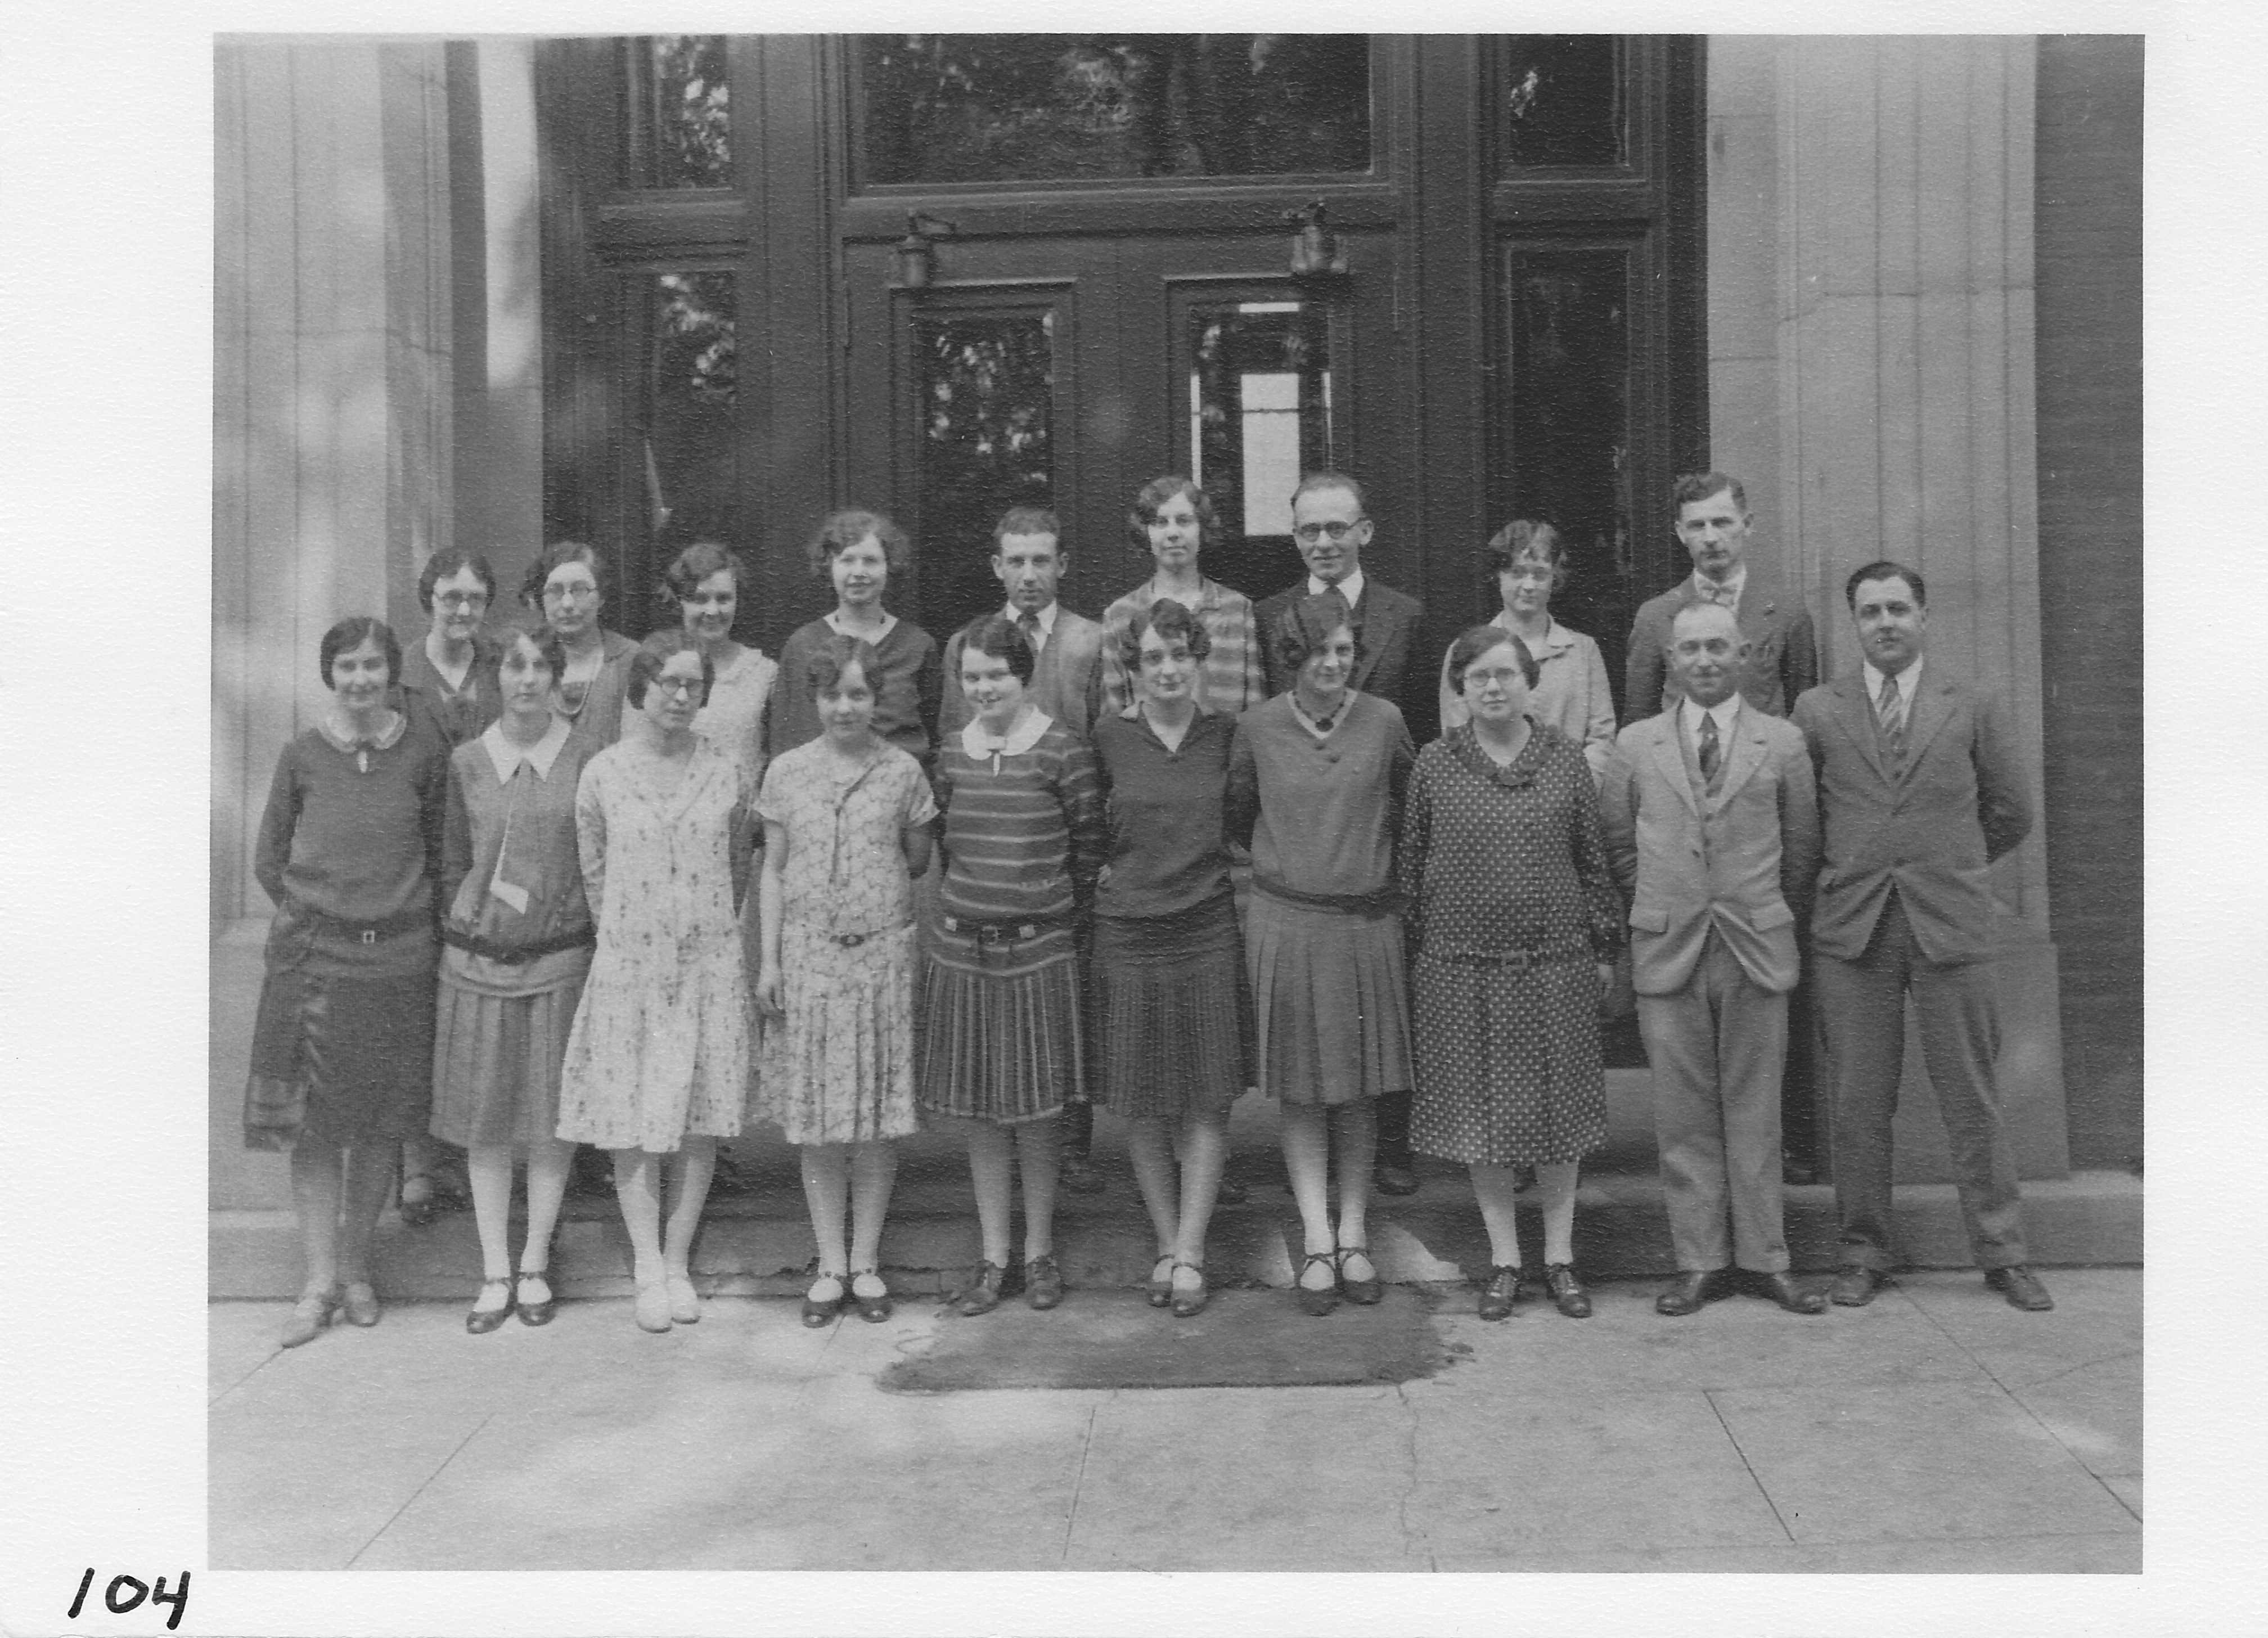 Morenci school teachers about 1930 or 1931.  Top row (l-r) Hattie Lang, Lulu Saulsbury, Alberta Spooner, Earl Rich, ____ Fritz, Ralph Folks (principal), and S. E. Touhey (superintendent).  Front row (l-r) _________, Lucille Harwick, Esther Peppiott, _________, Lavern Schofield, ___________, ____________, __________, A. B. Twist.